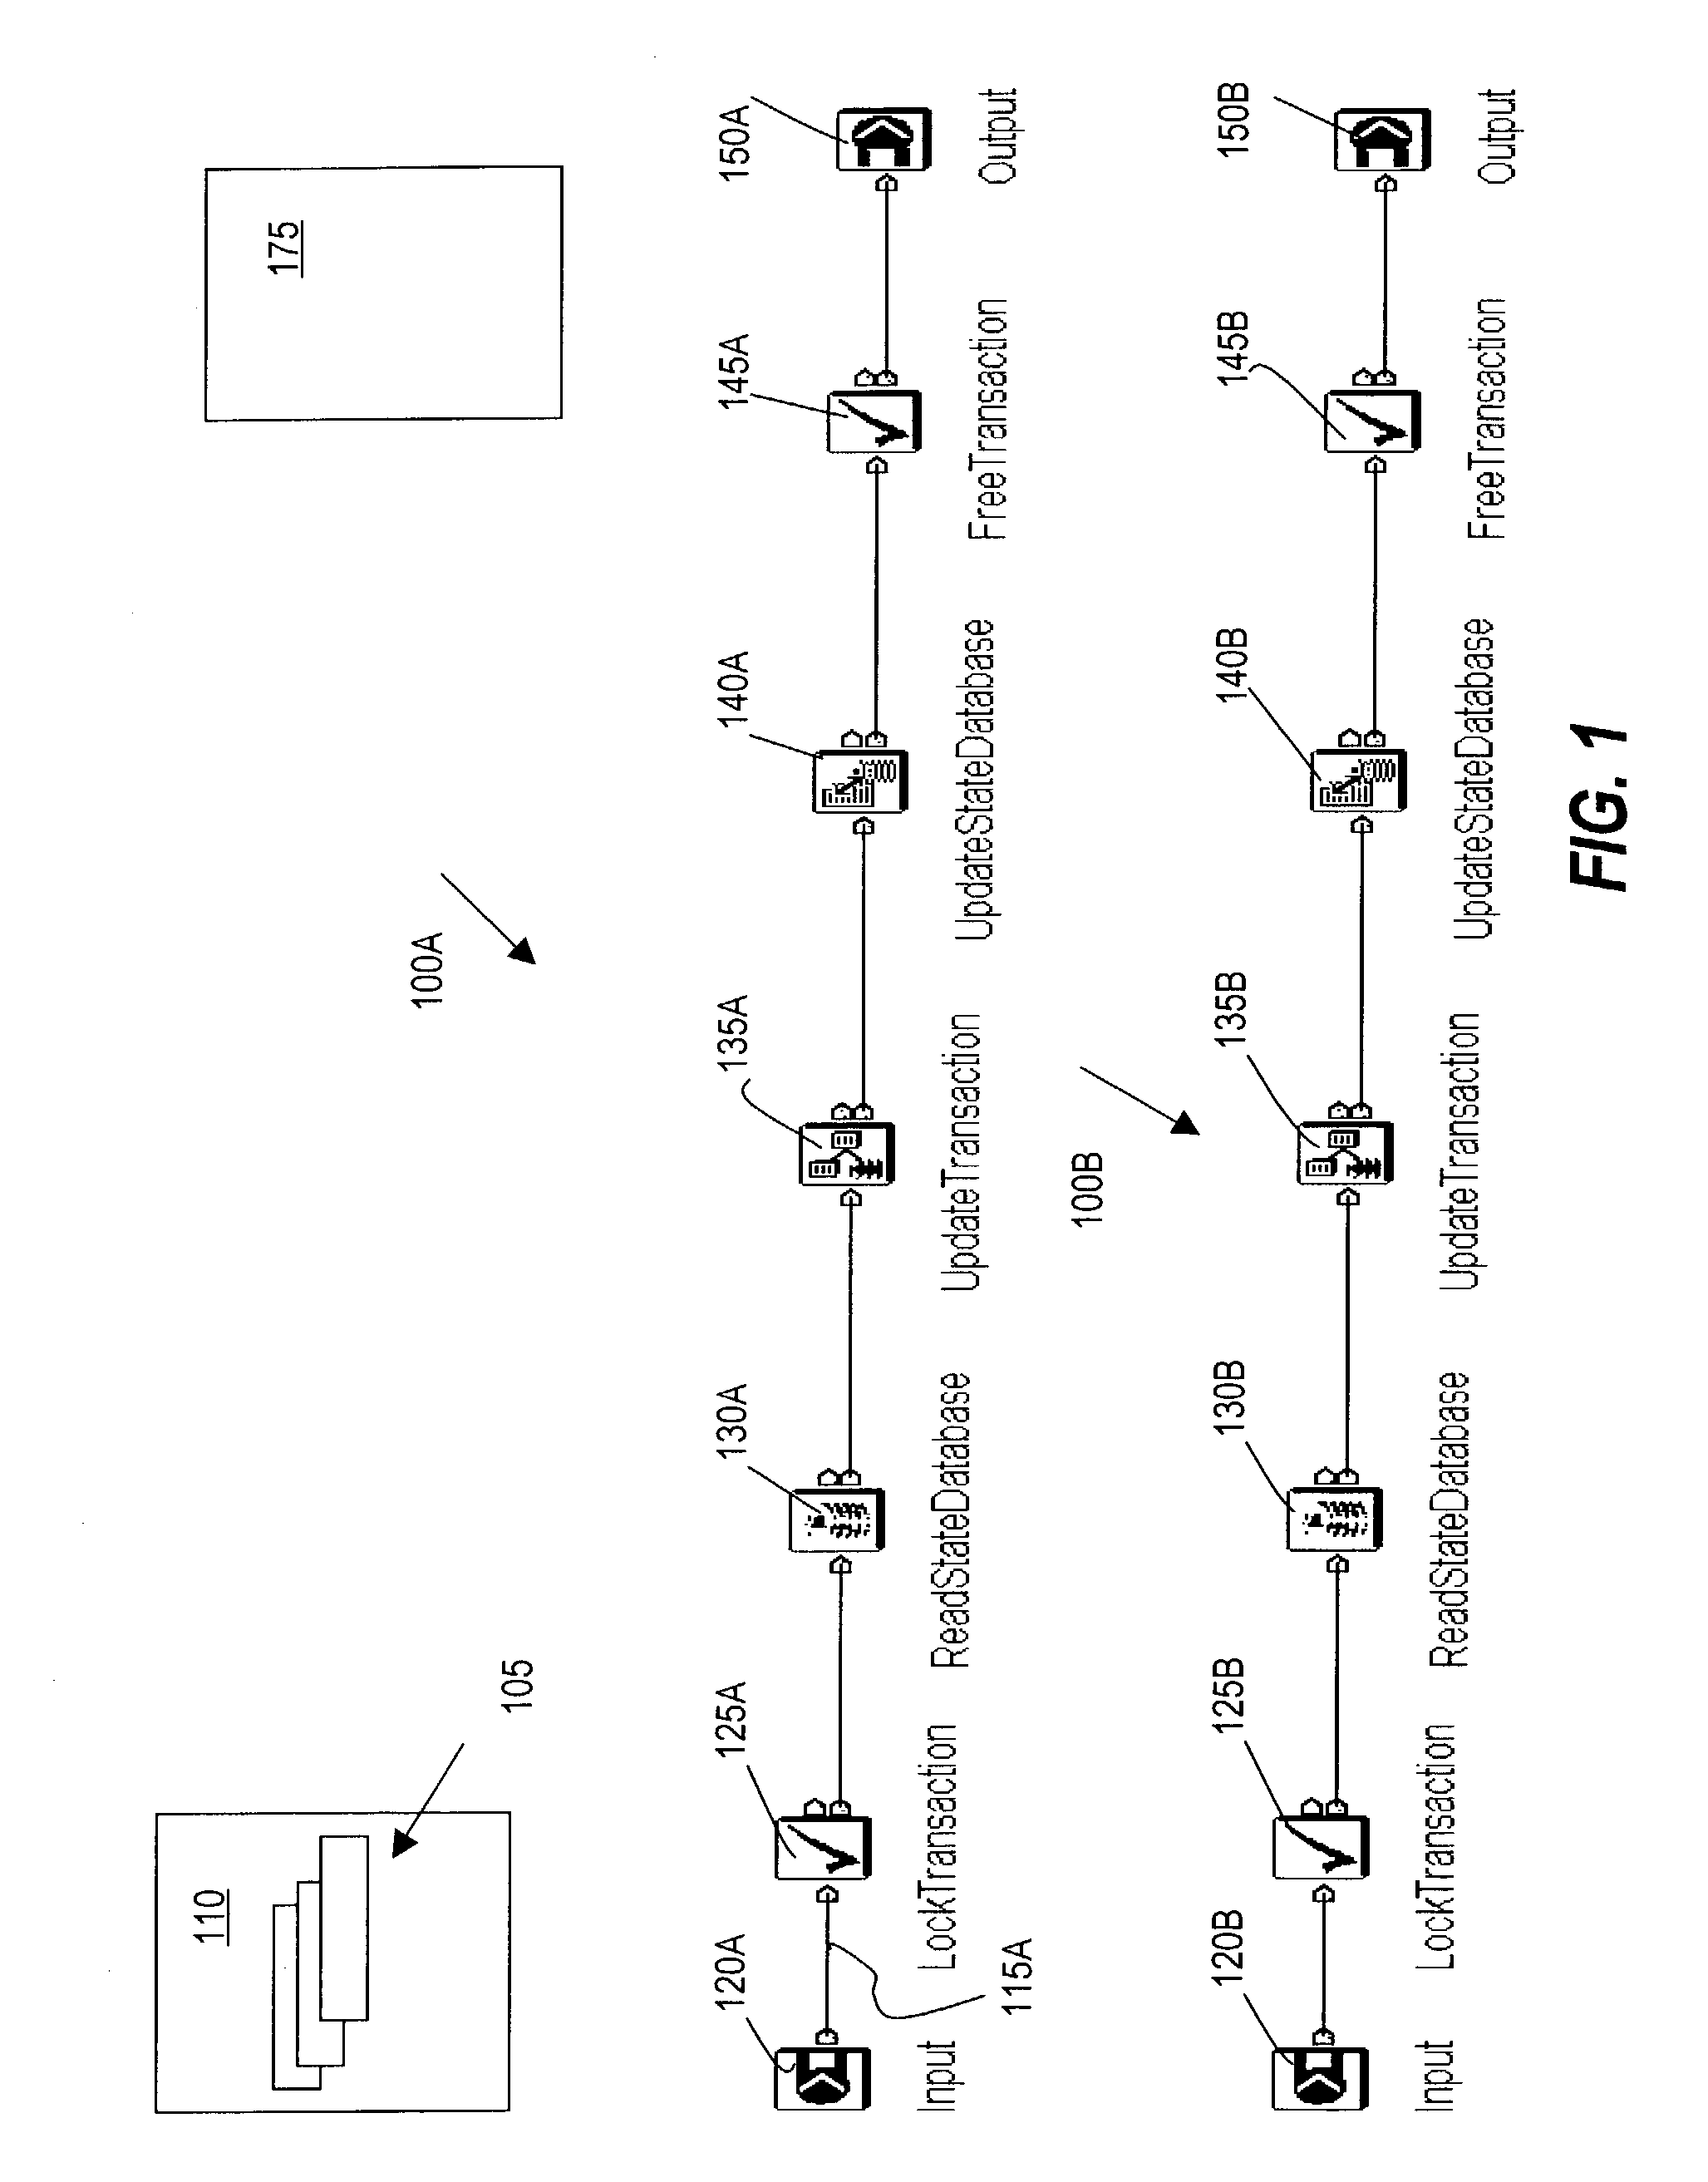 Method, apparatus and computer program product for managing message flow in a multithreaded, message flow environment